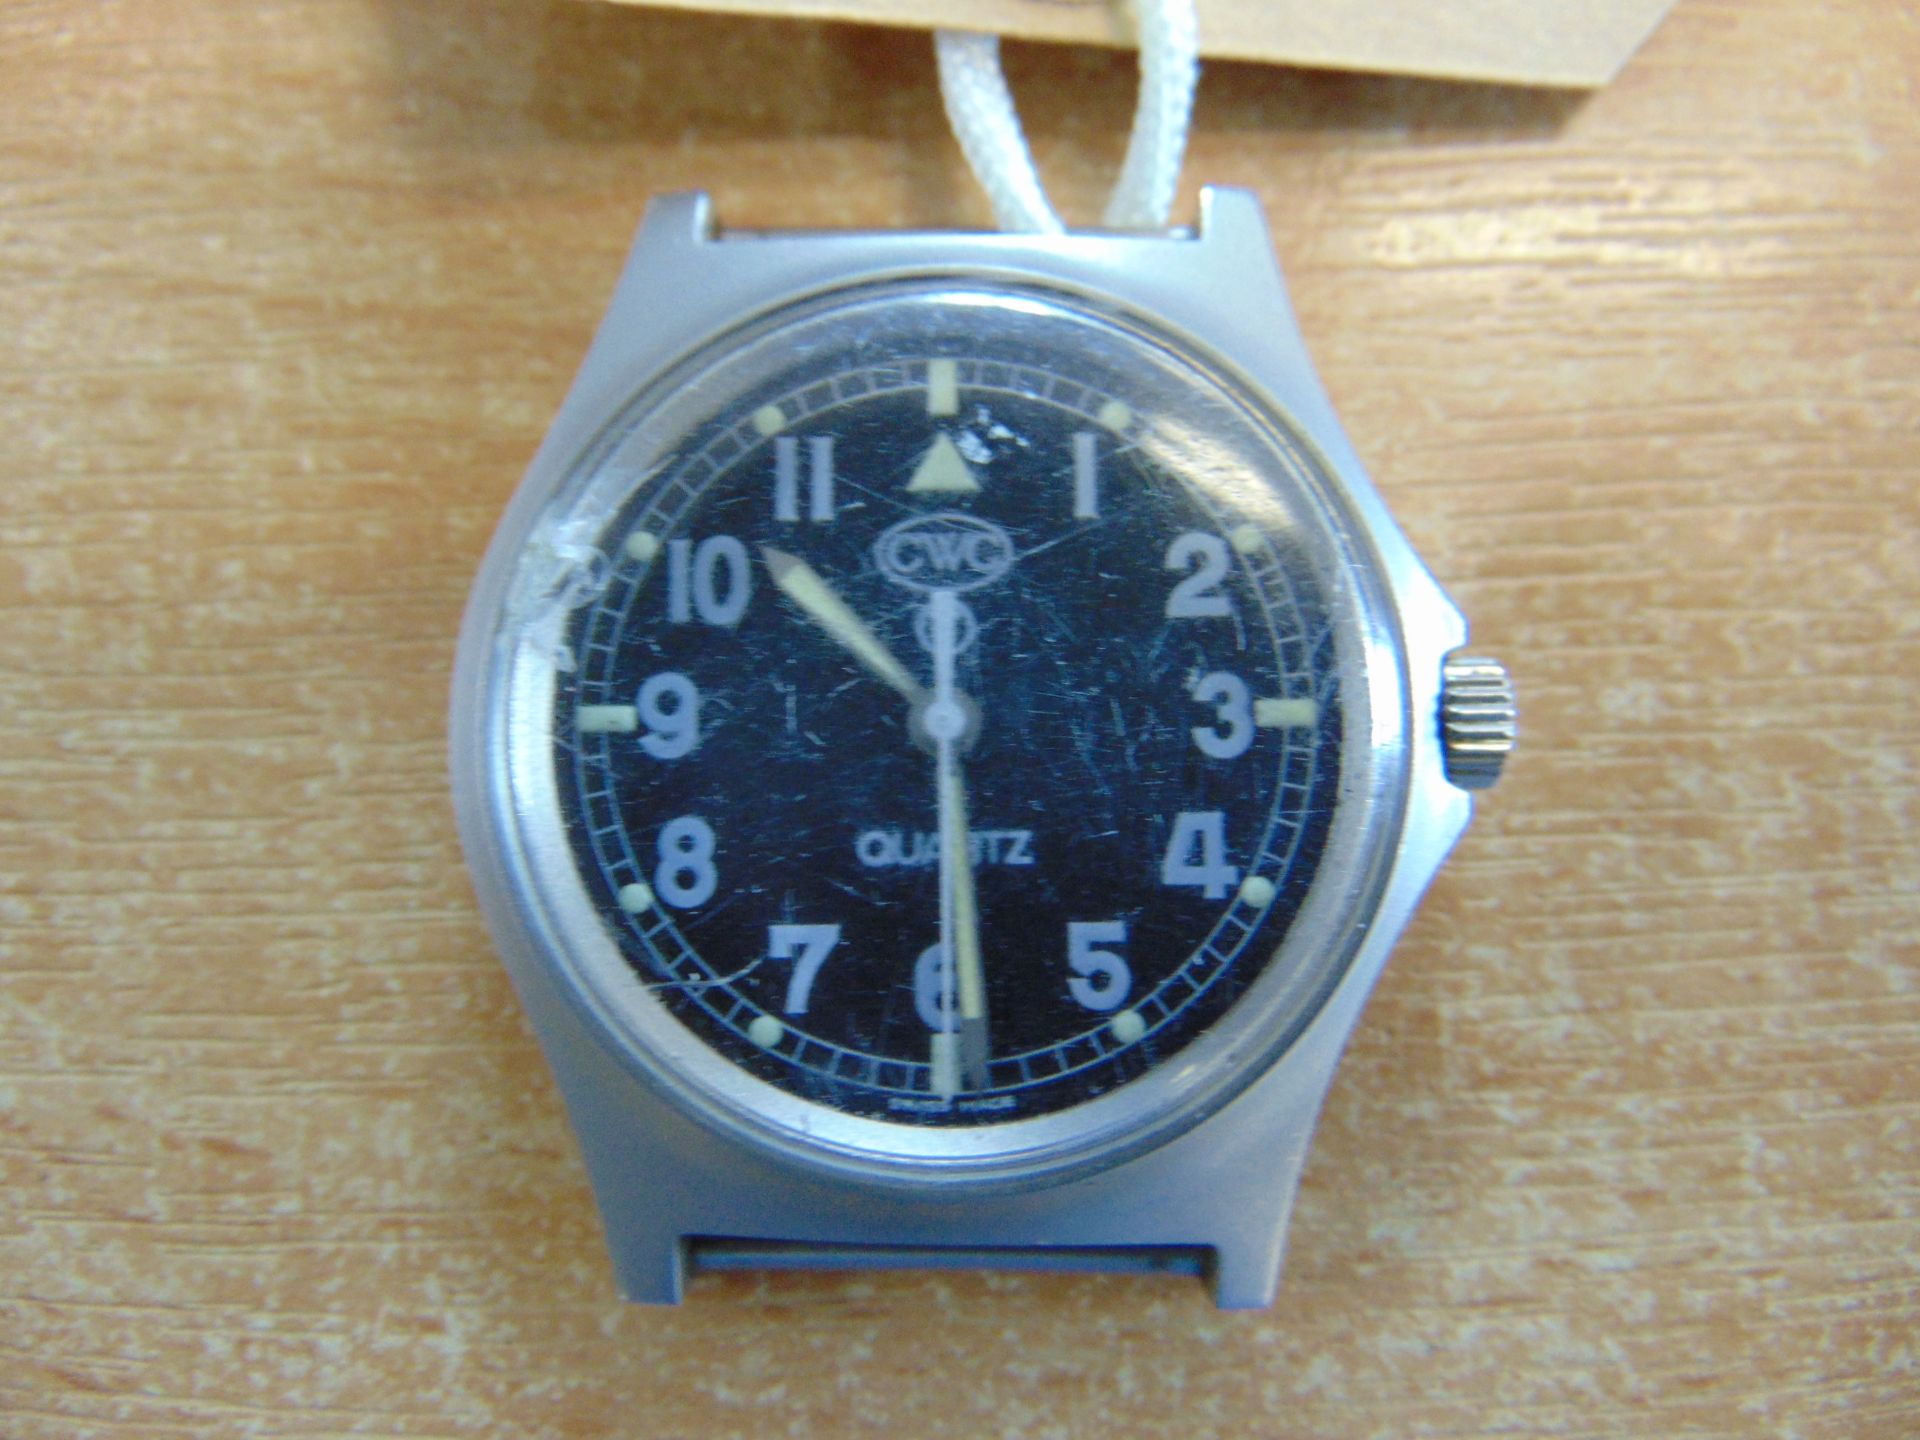 Rare CWC 0552 Royal Marines Issue Service Watch Nato Markings, Date 1990, Gulf War 1. Small Chip - Image 2 of 4